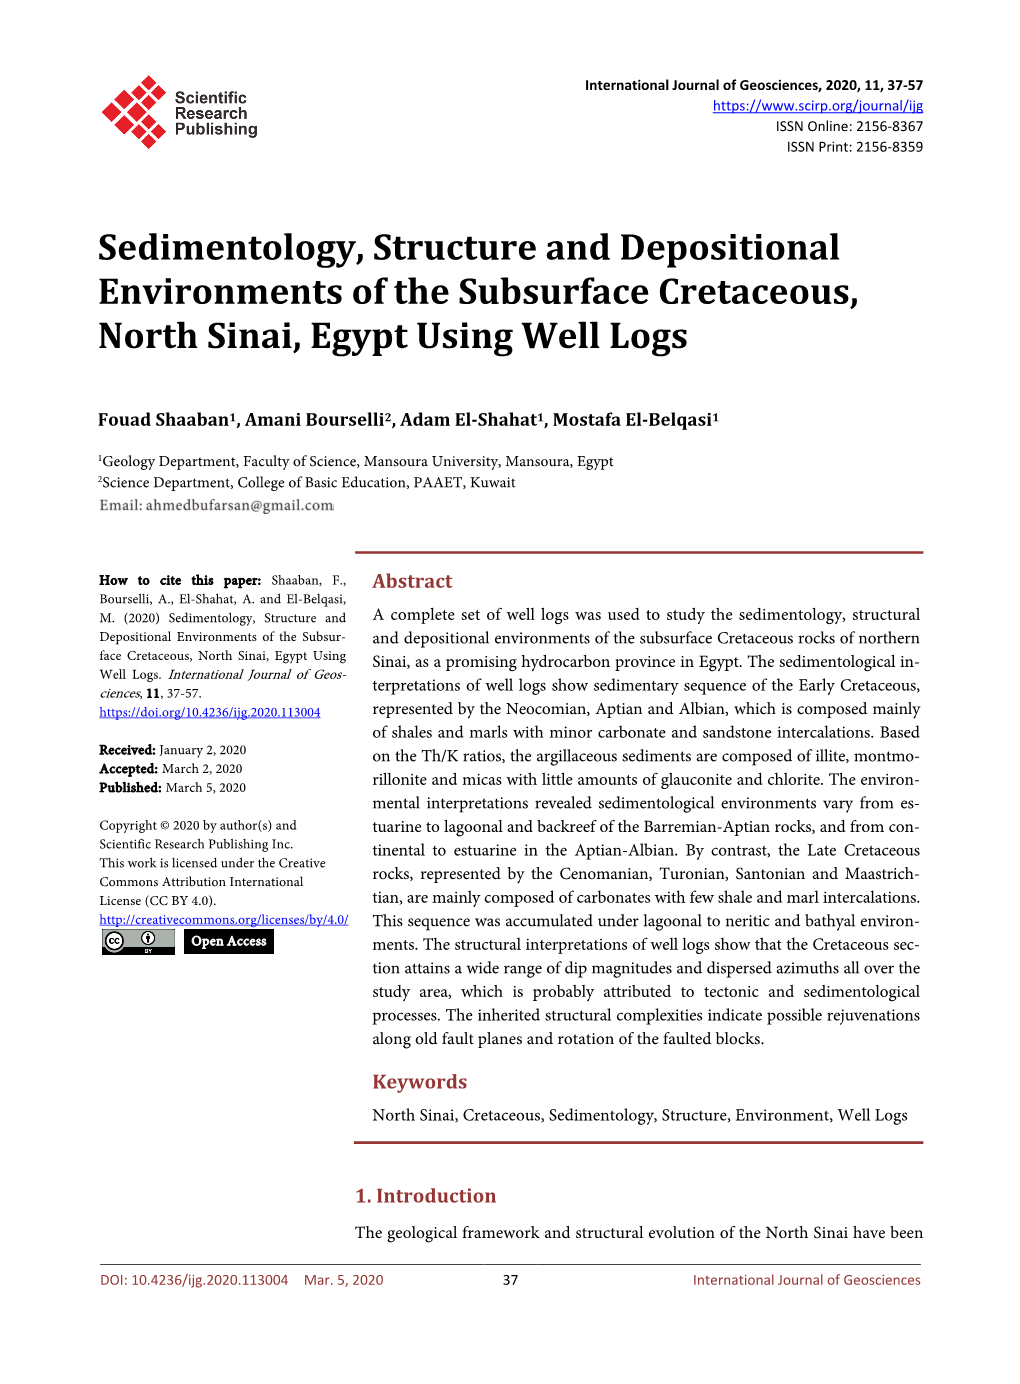 Sedimentology, Structure and Depositional Environments of the Subsurface Cretaceous, North Sinai, Egypt Using Well Logs